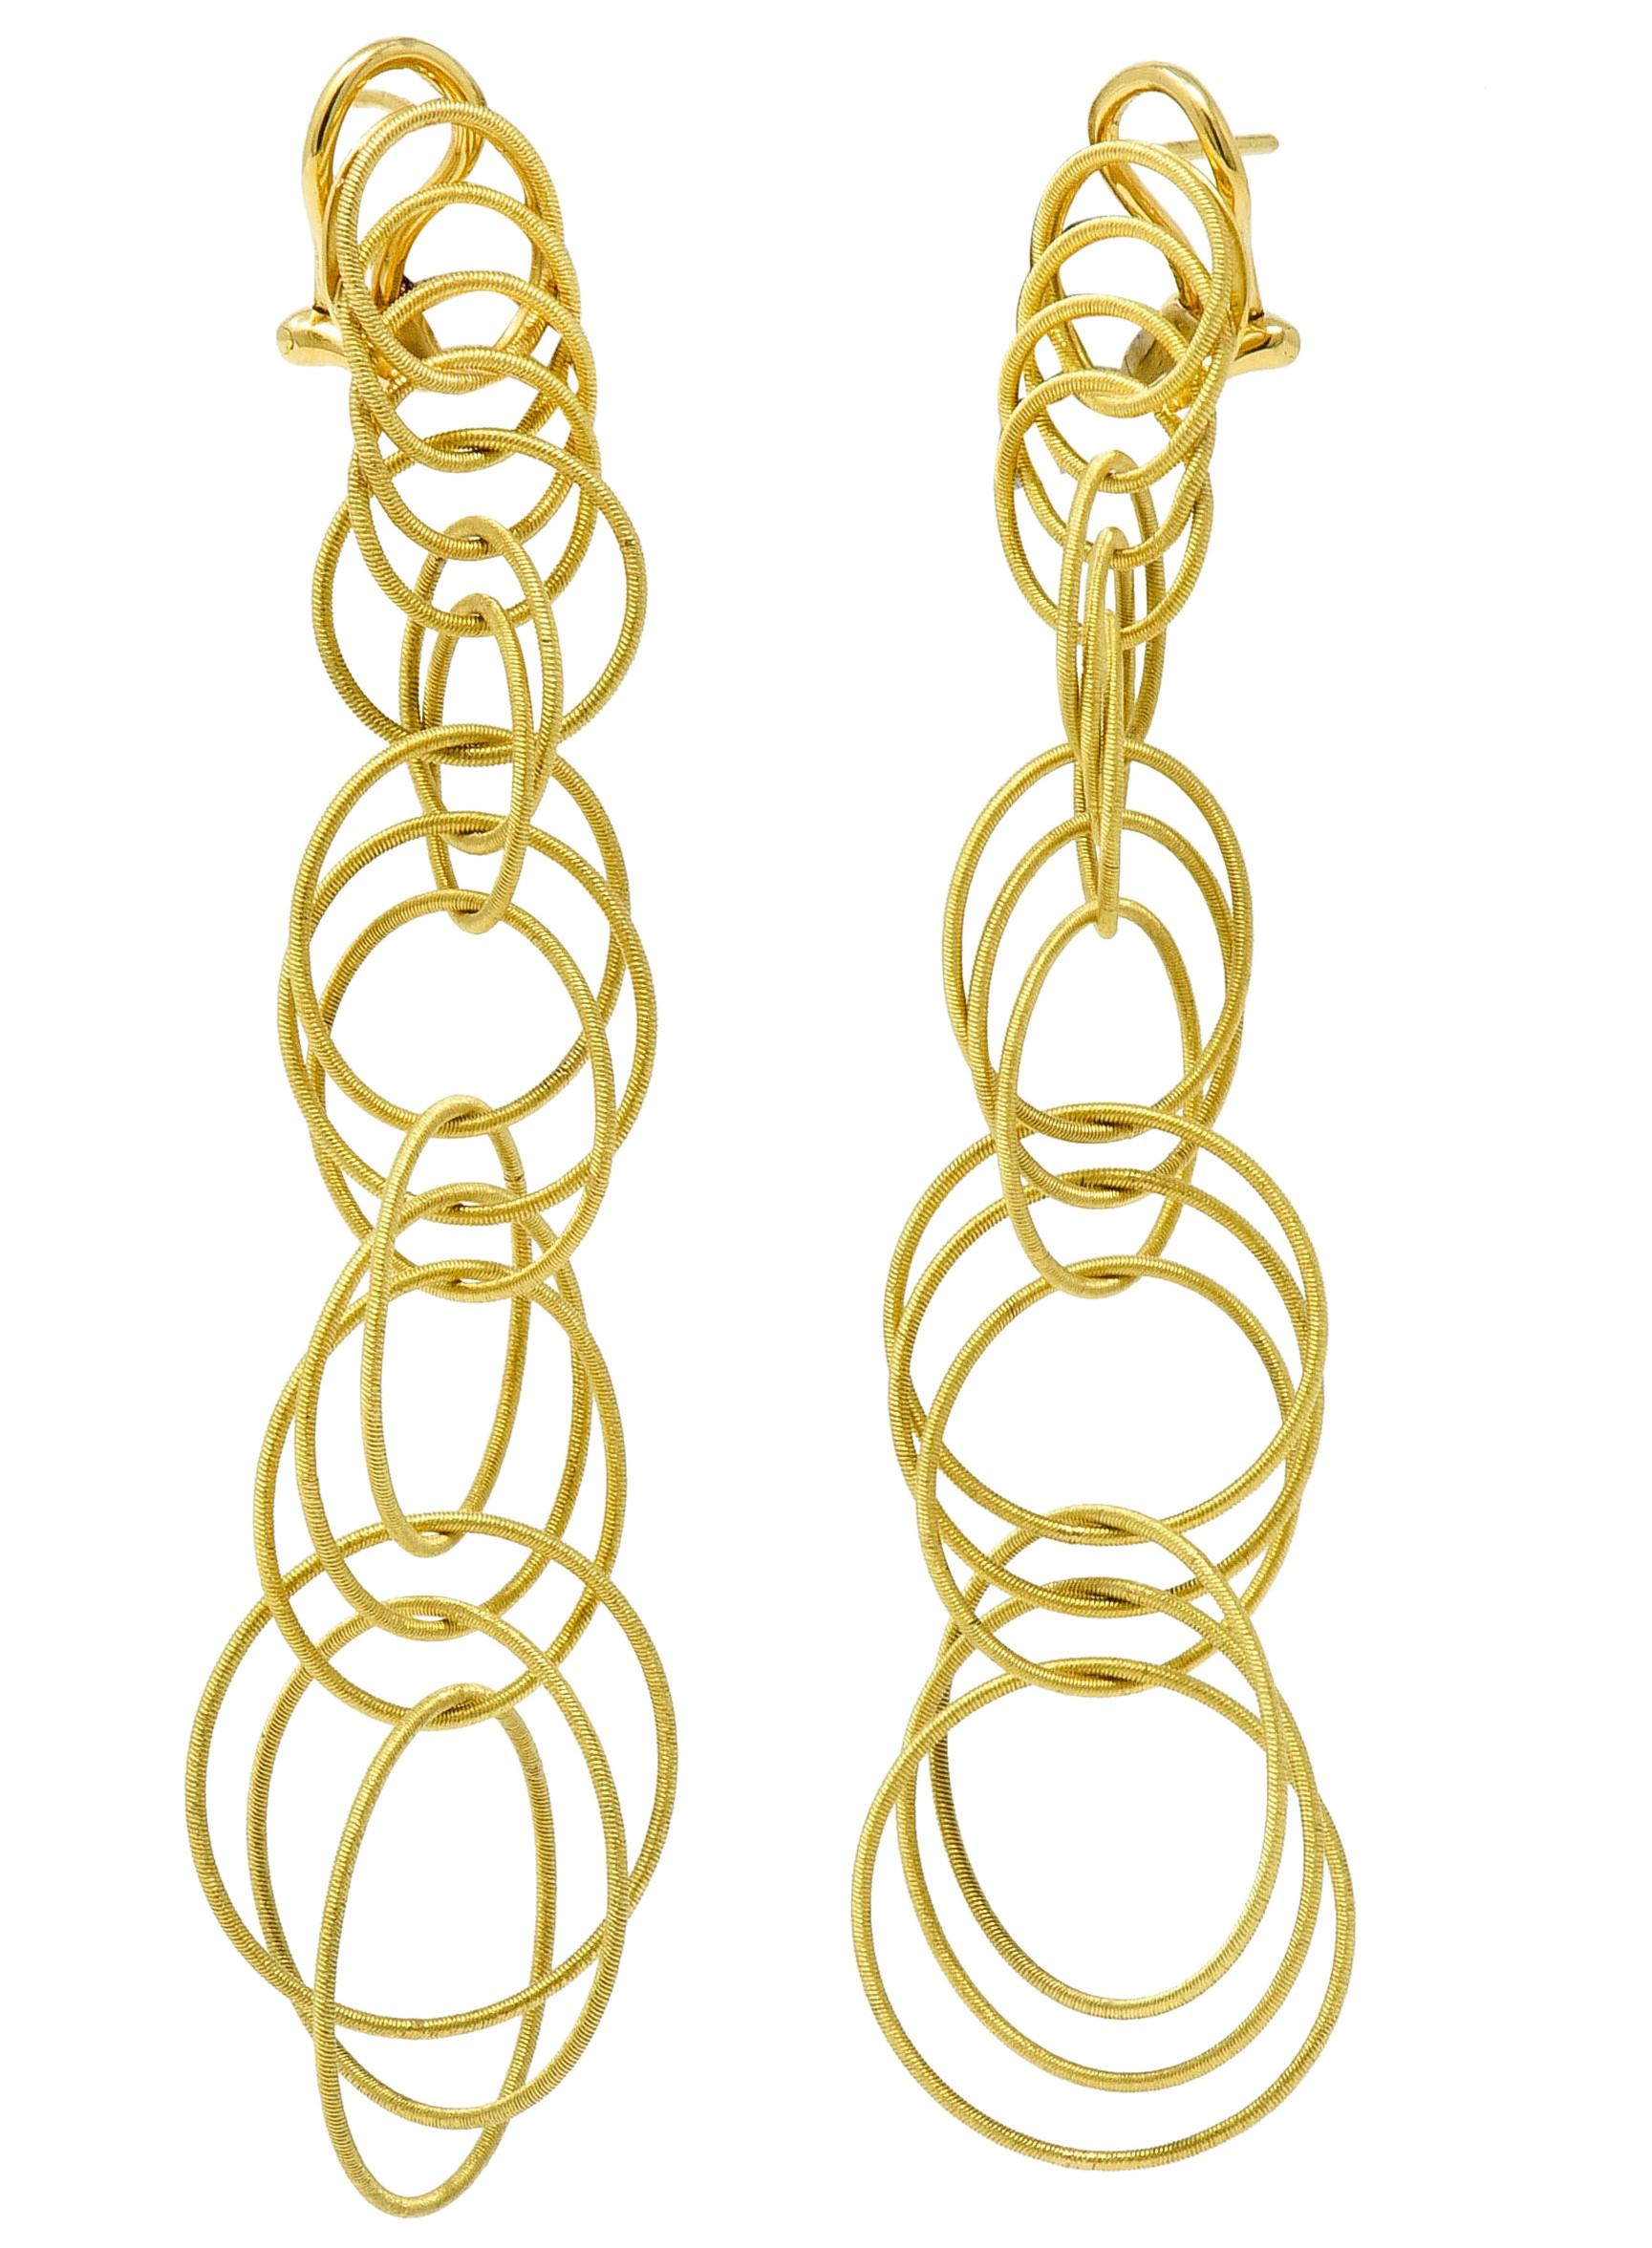 Drop earrings are comprised of light and springy gold circles

Layered, intersecting, and graduating in size

With a fine ribbed texture throughout

Completed by posts and hinged omega backs

With Italian assay marks for 18 karat gold

Signed